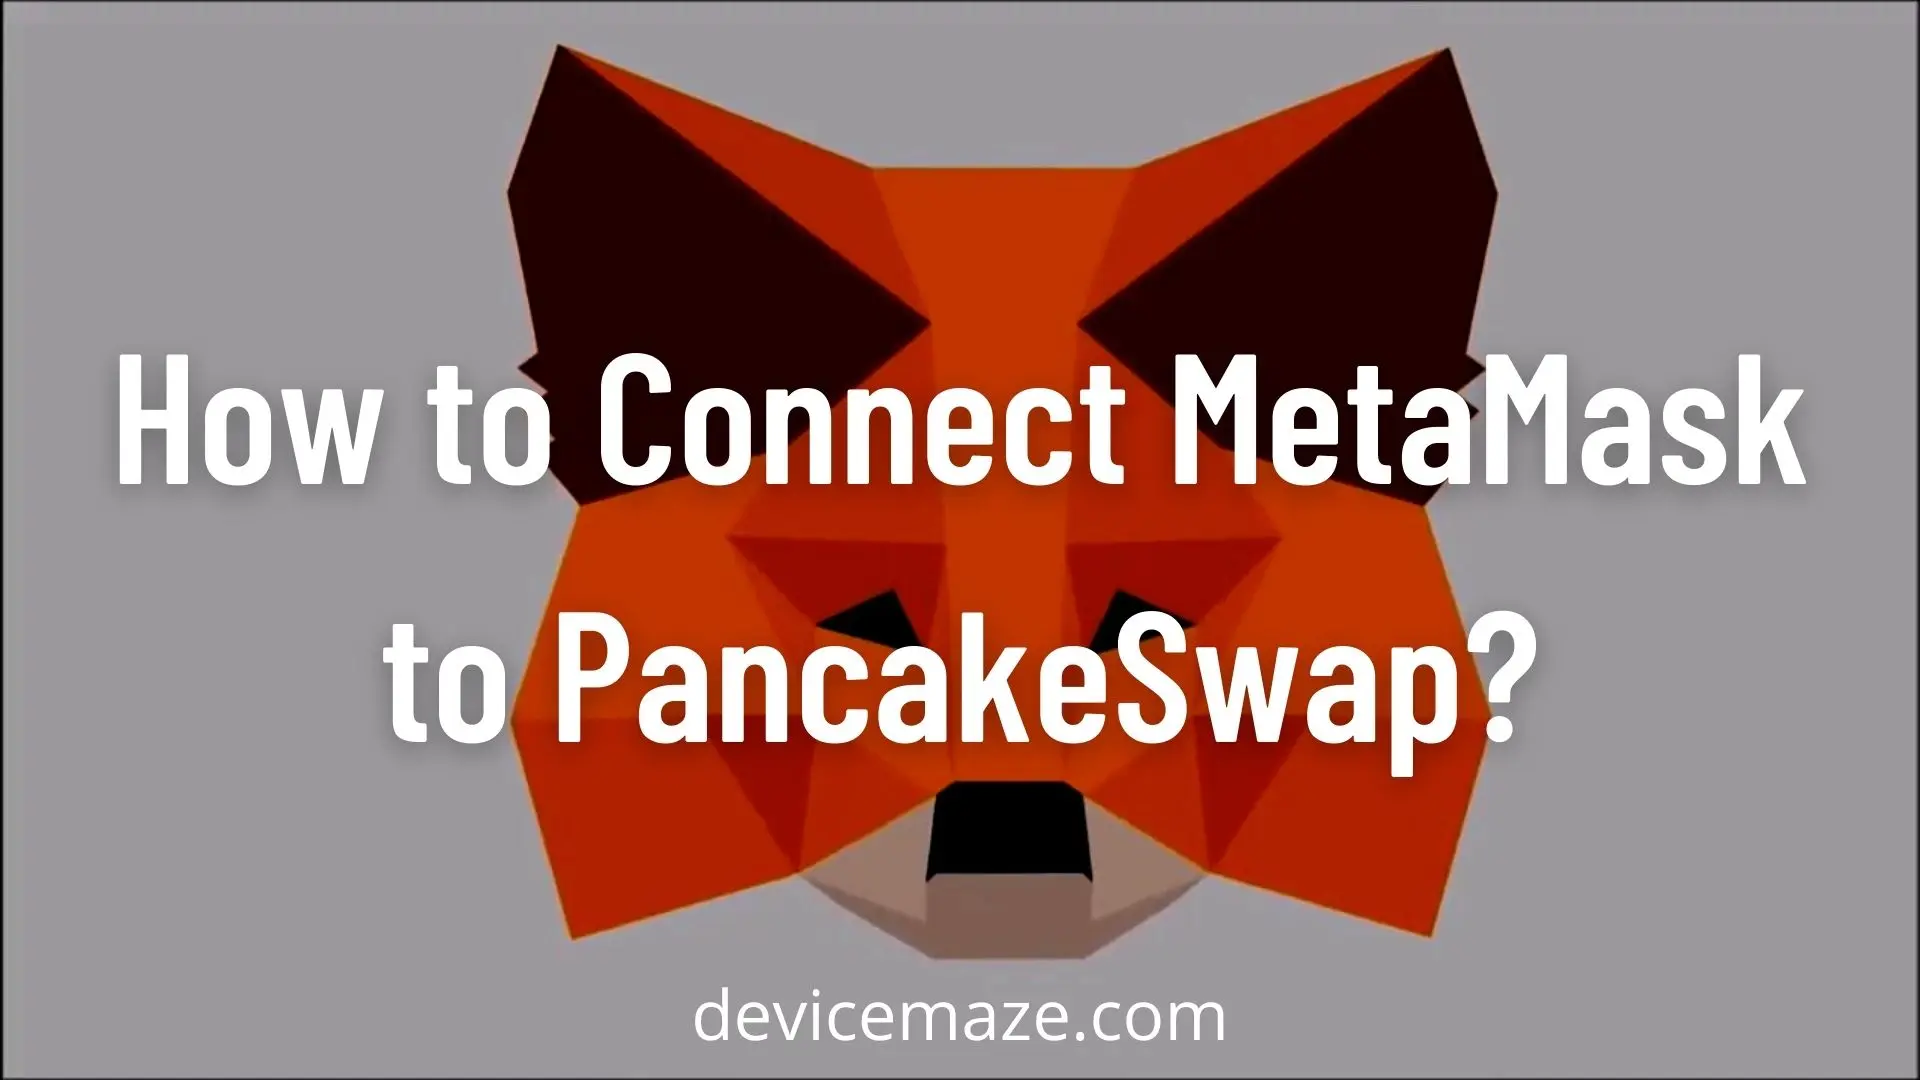 How to Connect MetaMask to PancakeSwap